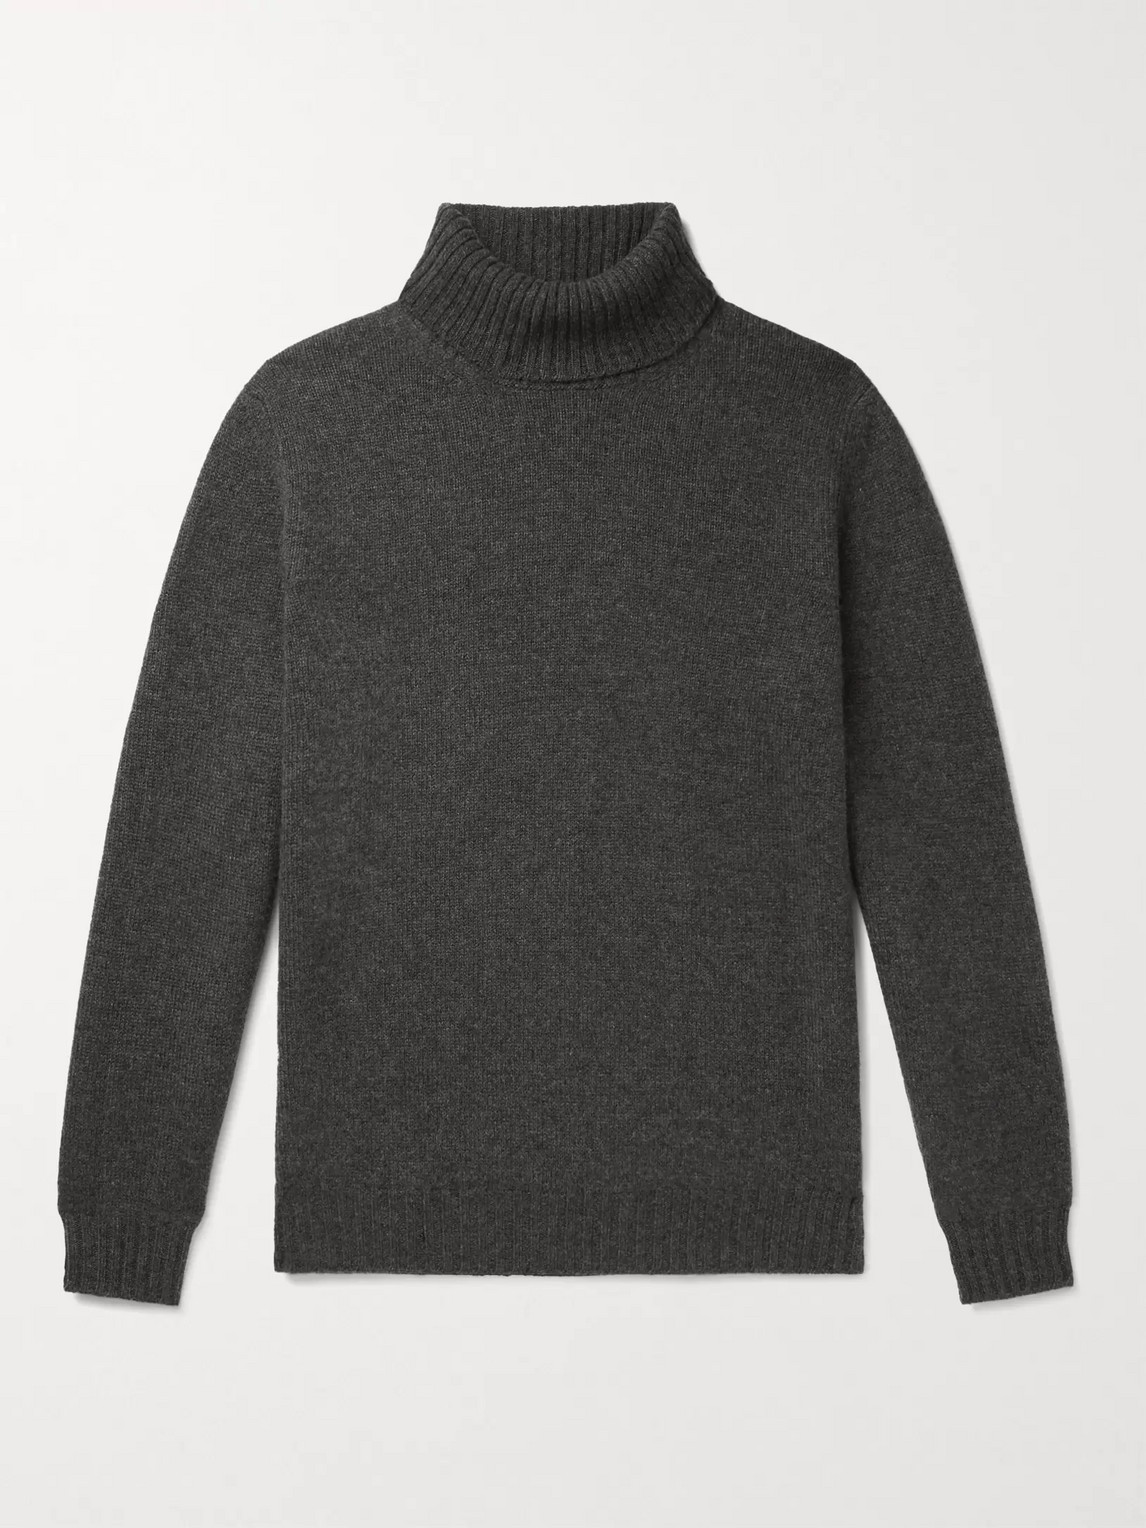 Saman Amel Cashmere Rollneck Sweater In Gray